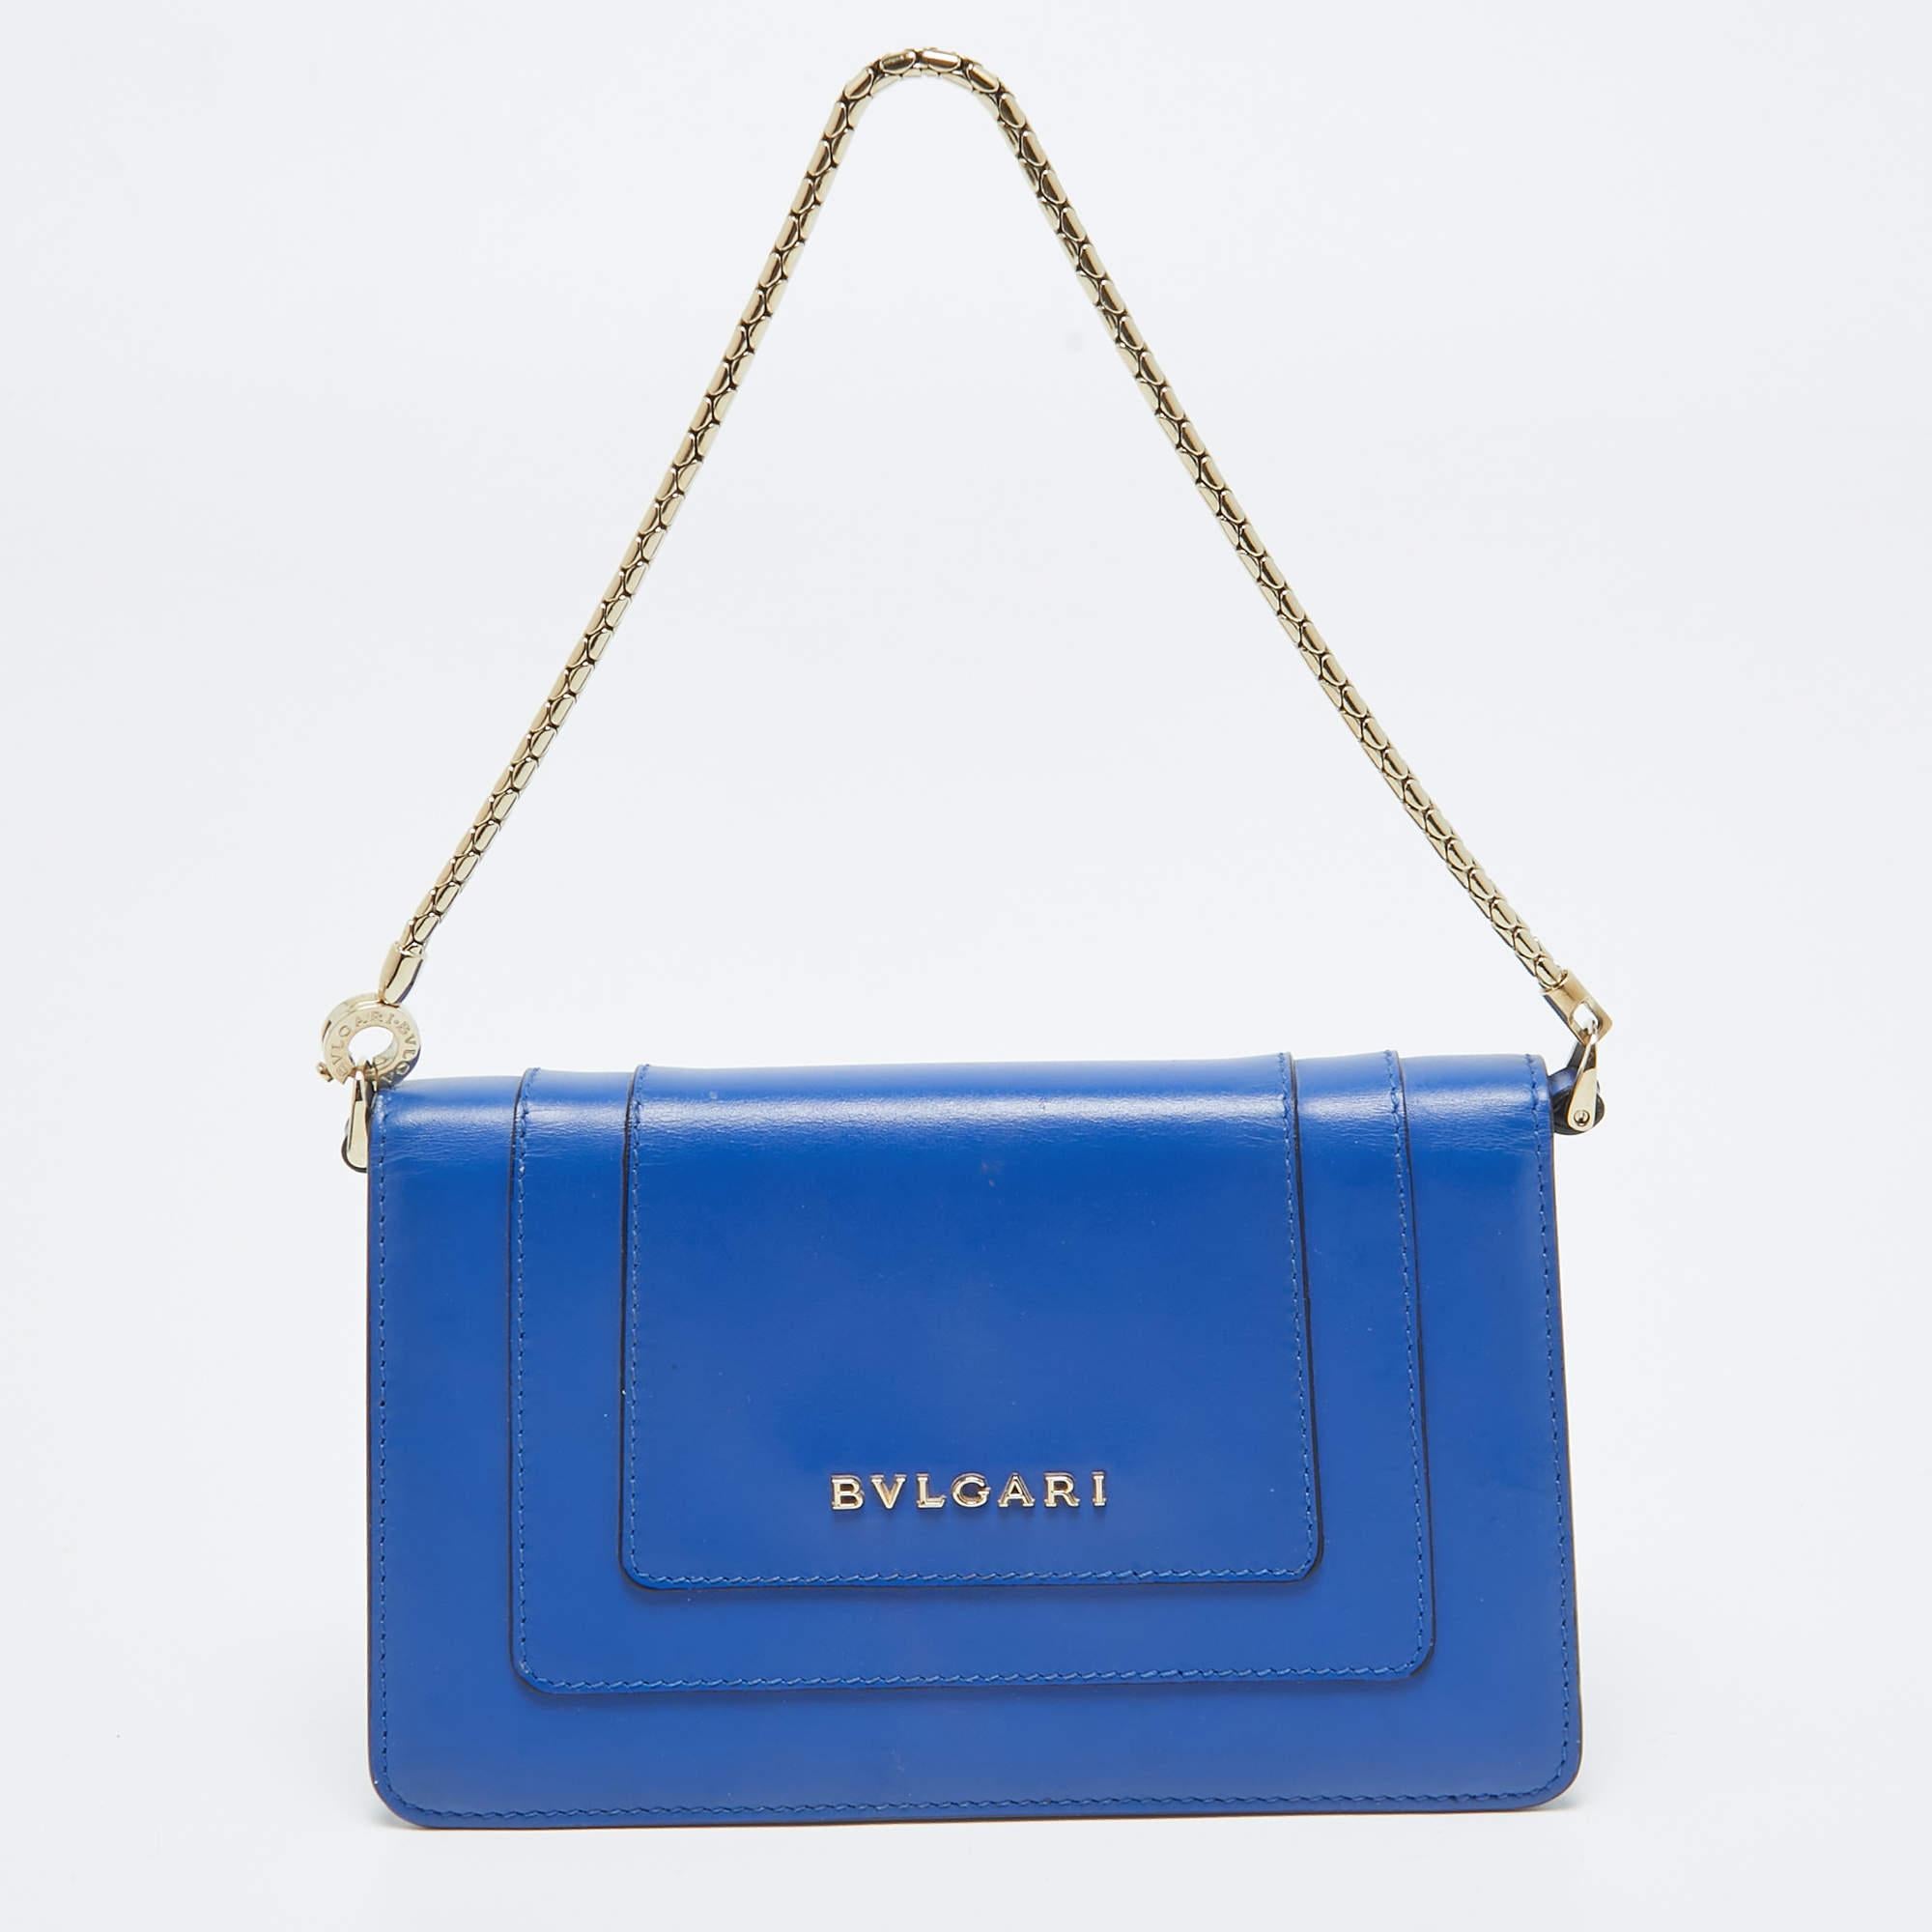 The Bvlgari Serpenti Forever pochette is a captivating blend of luxury and sophistication. Crafted from exquisite blue leather, its compact design exudes elegance. The iconic Serpenti head closure adds a touch of opulence, making it a timeless